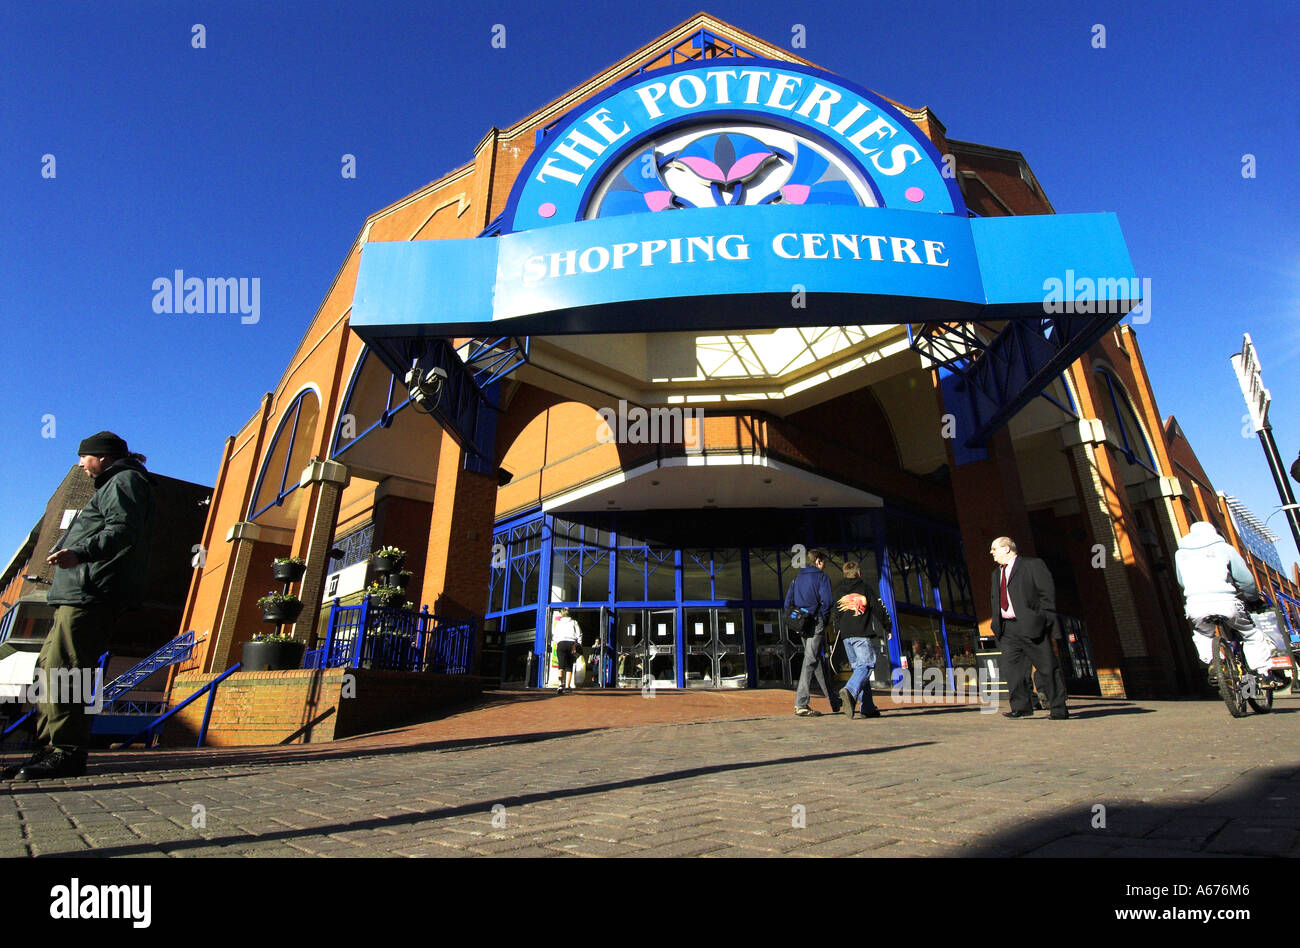 Potteries Shopping Centre Stock Photo